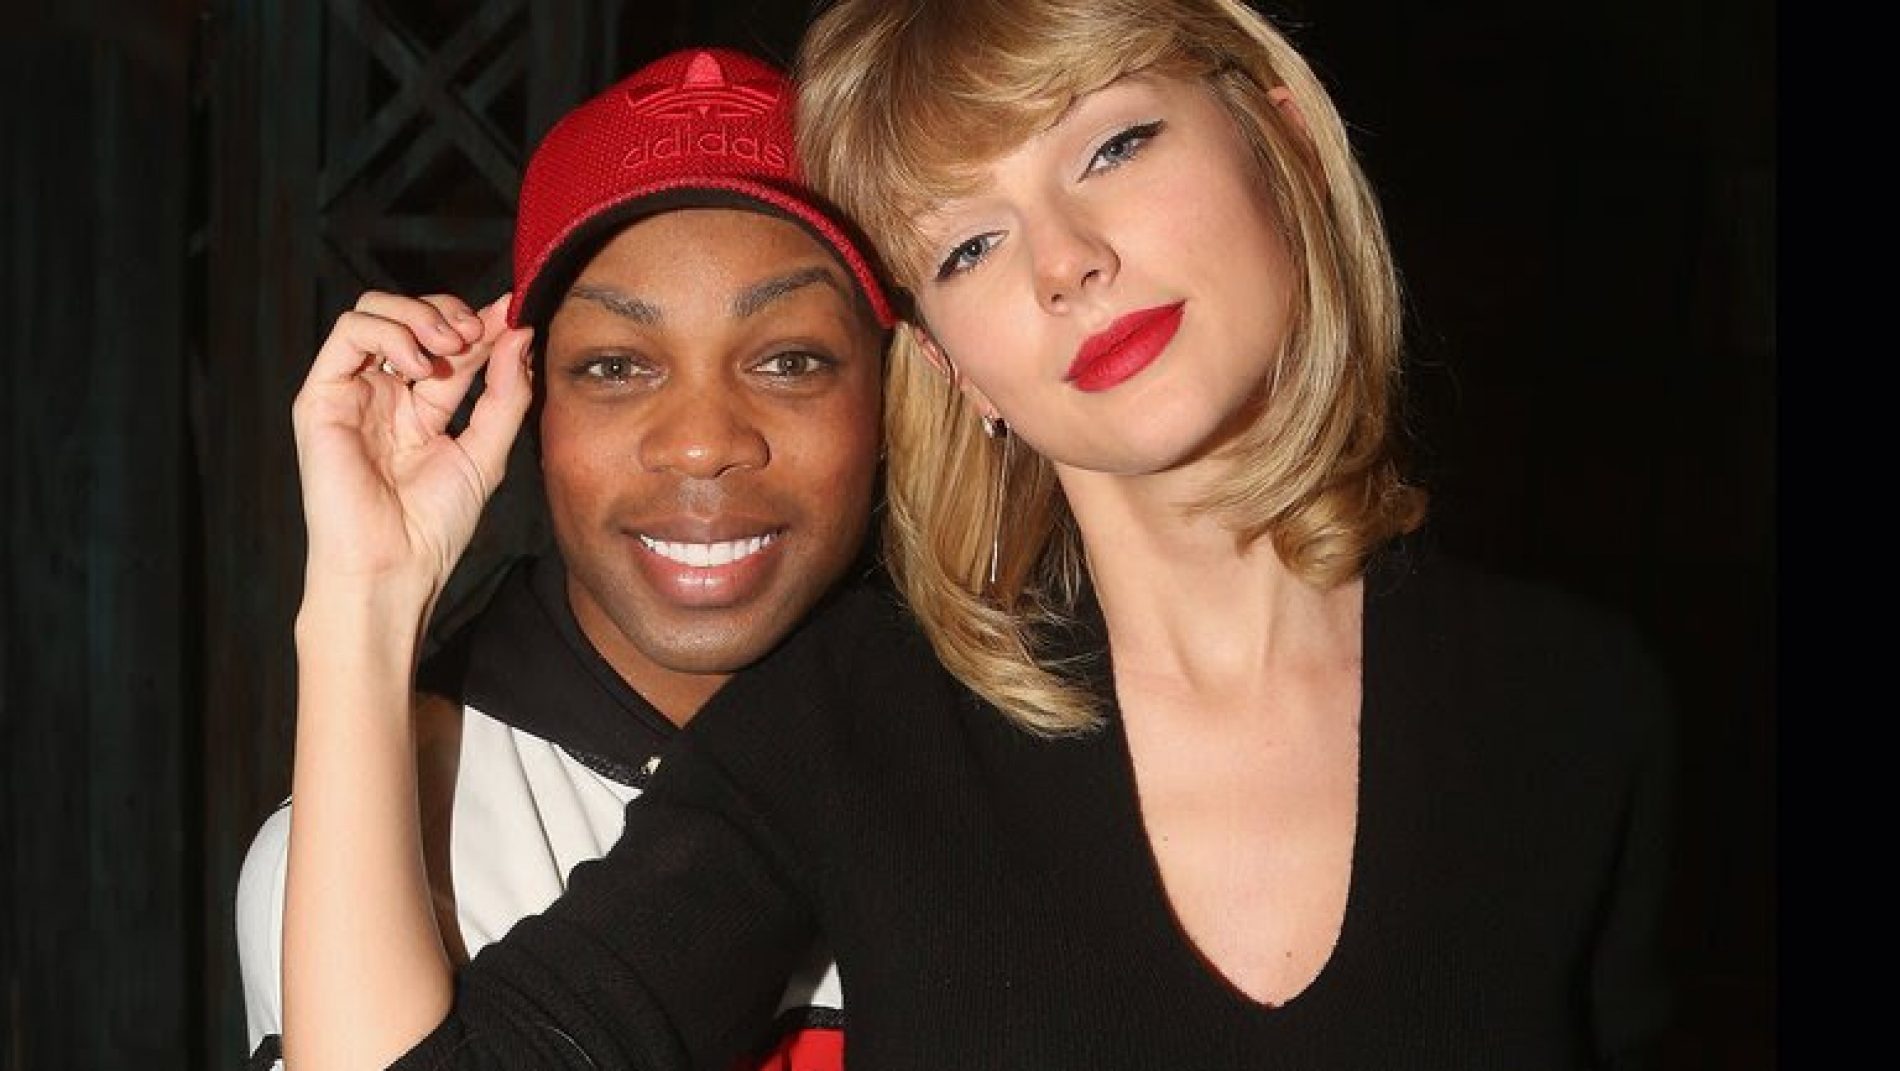 Todrick Hall talks about being friends with Taylor Swift and helping her use her voice to support the LGBT community